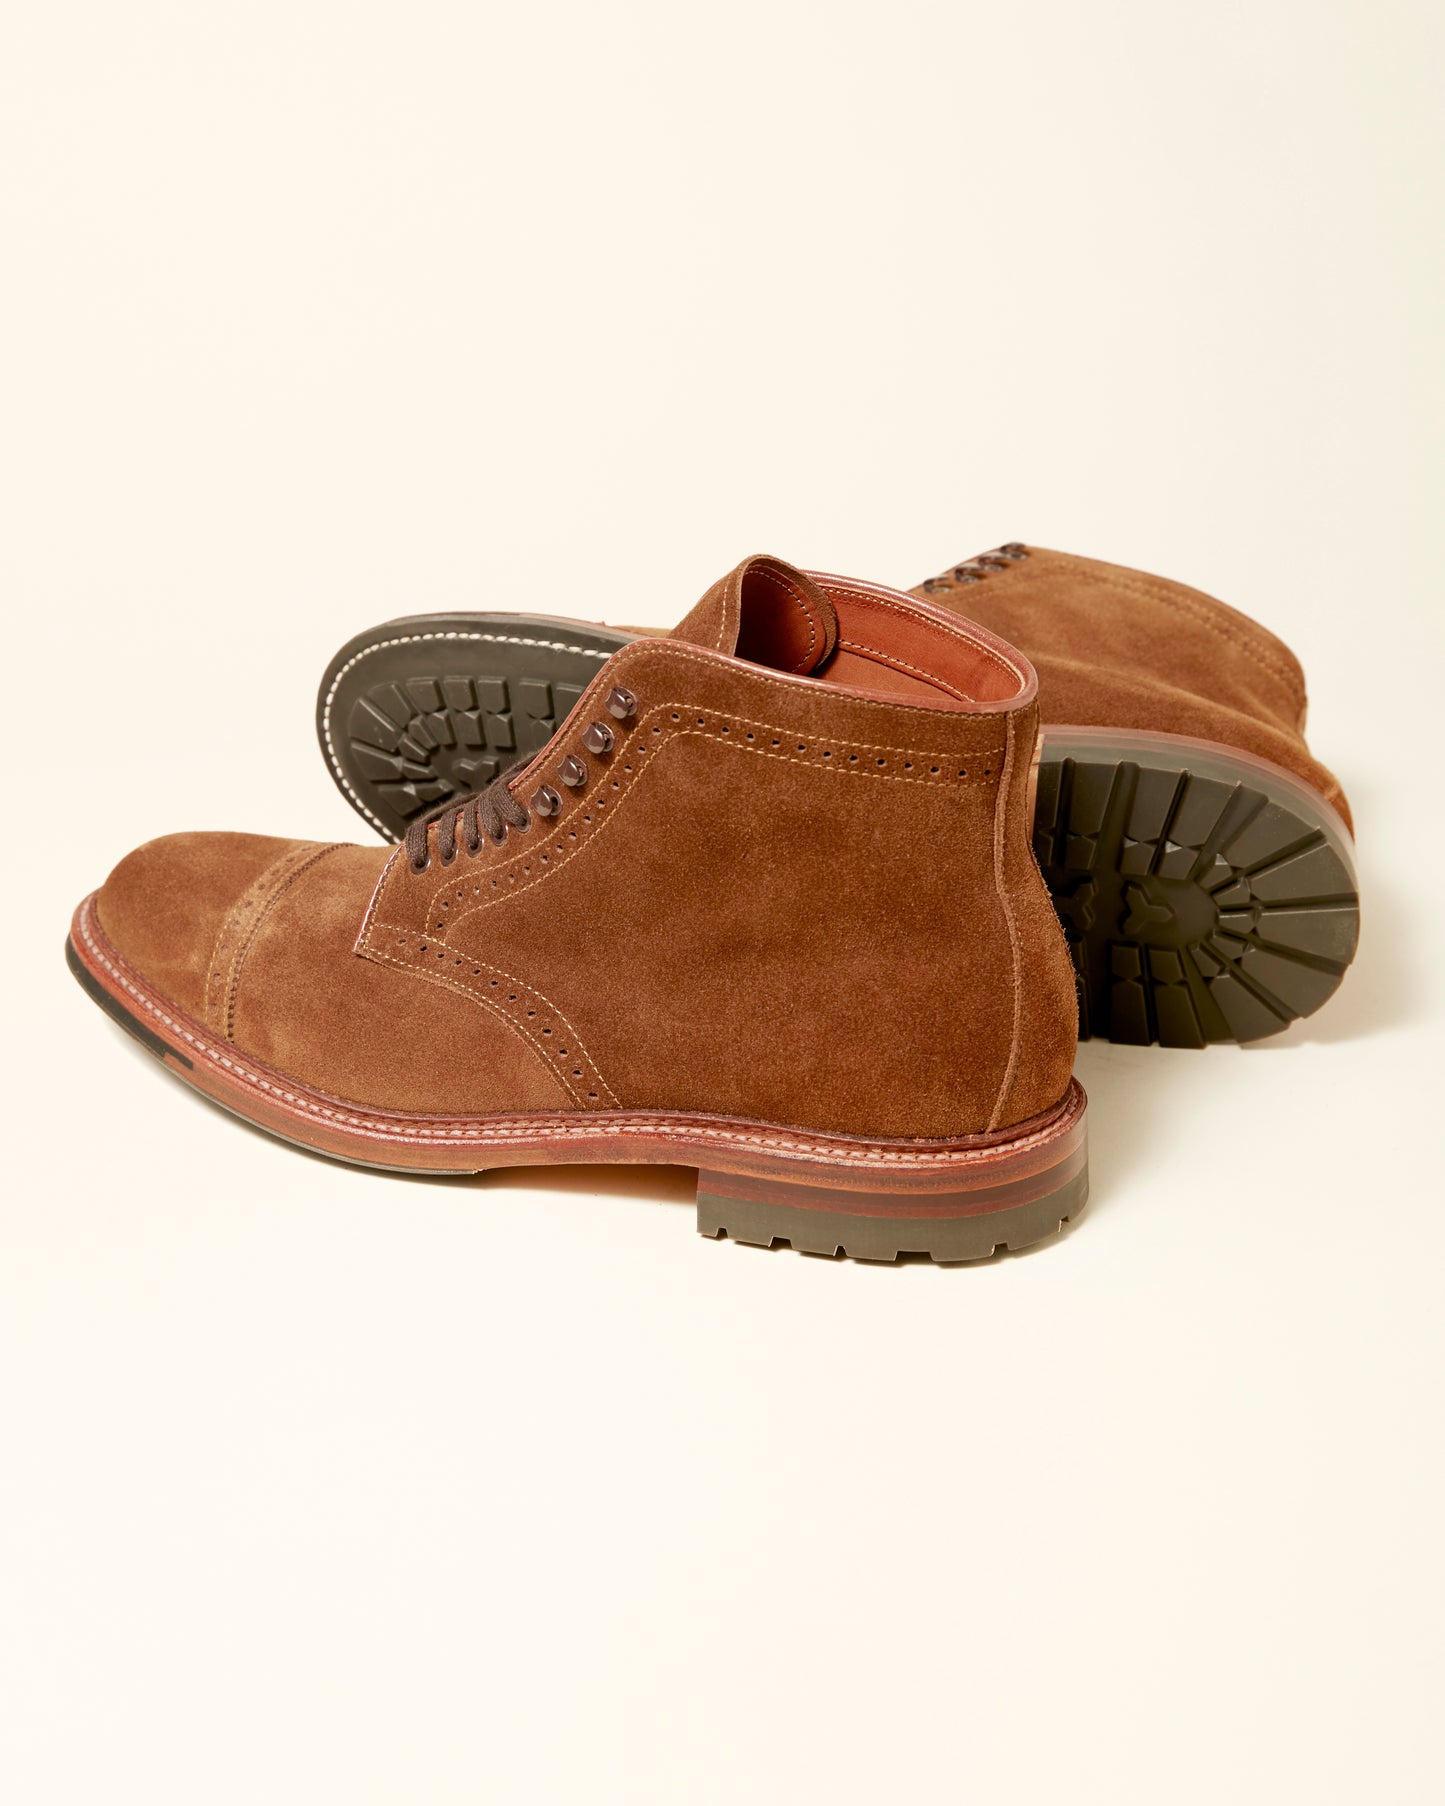 "Davis" Perforated Tip Boot in Snuff Suede, Barrie Last